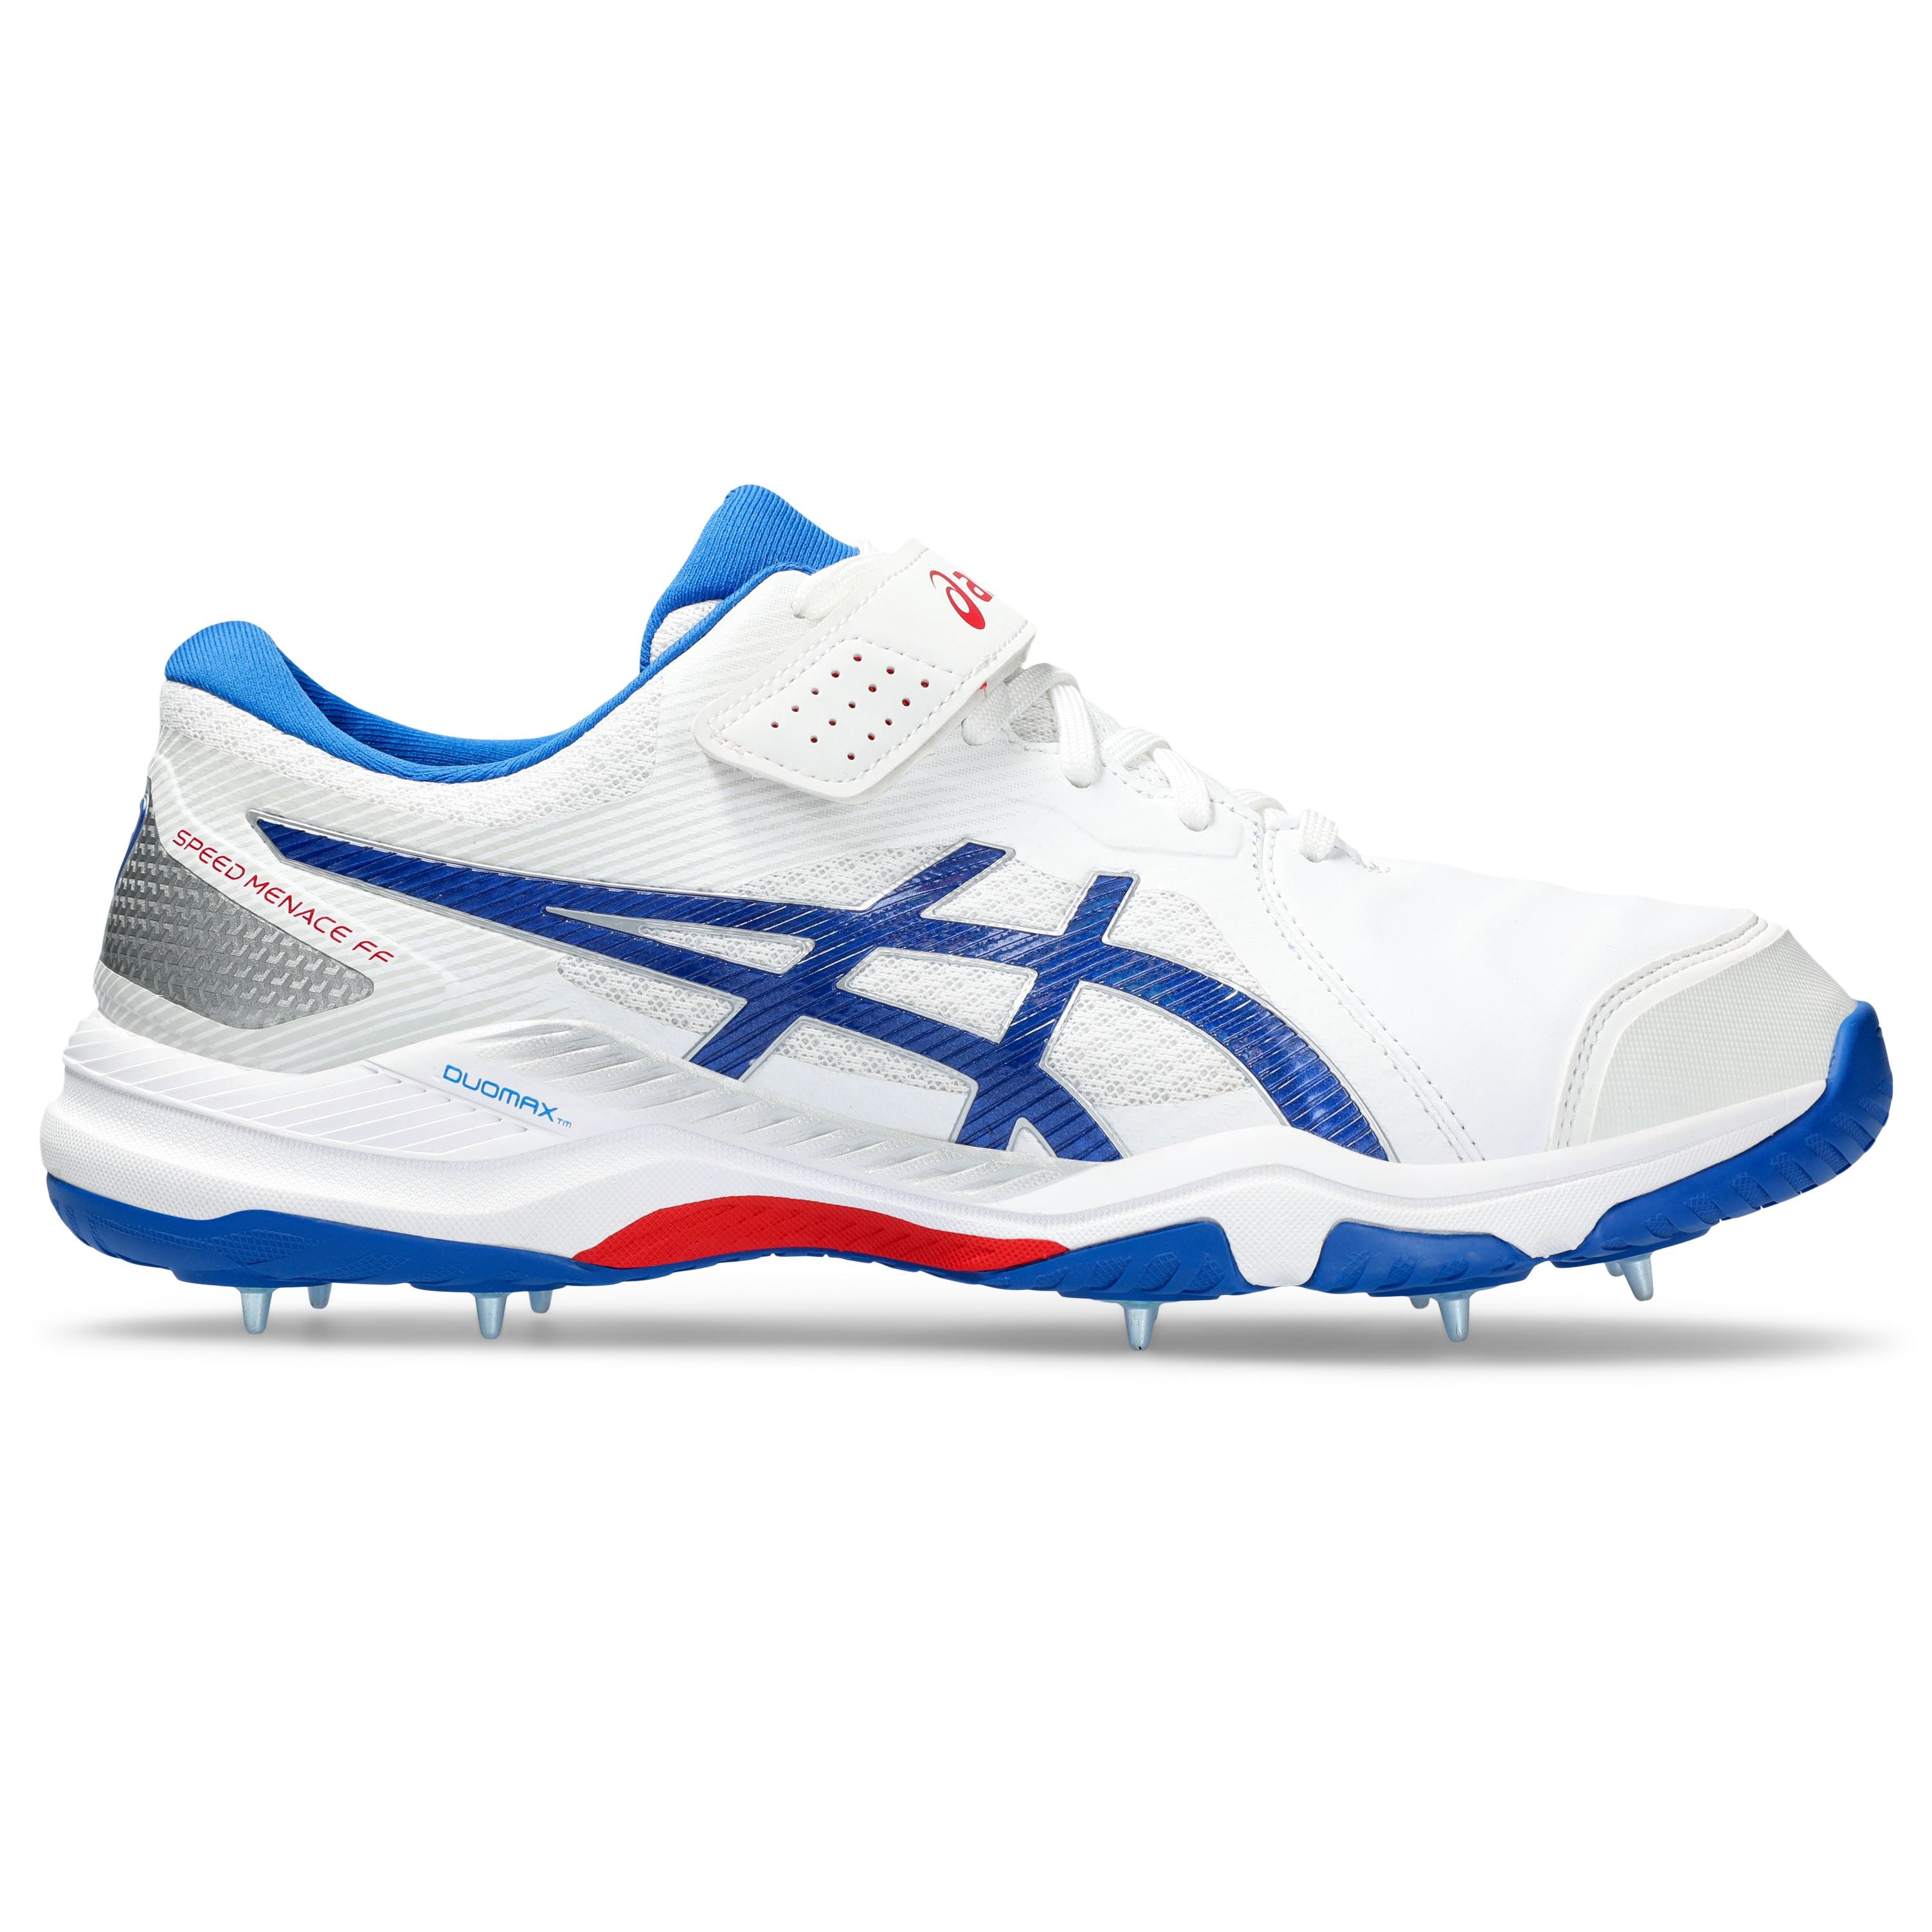 Asics Speed Menace FF Steel Spikes Cricket Shoes